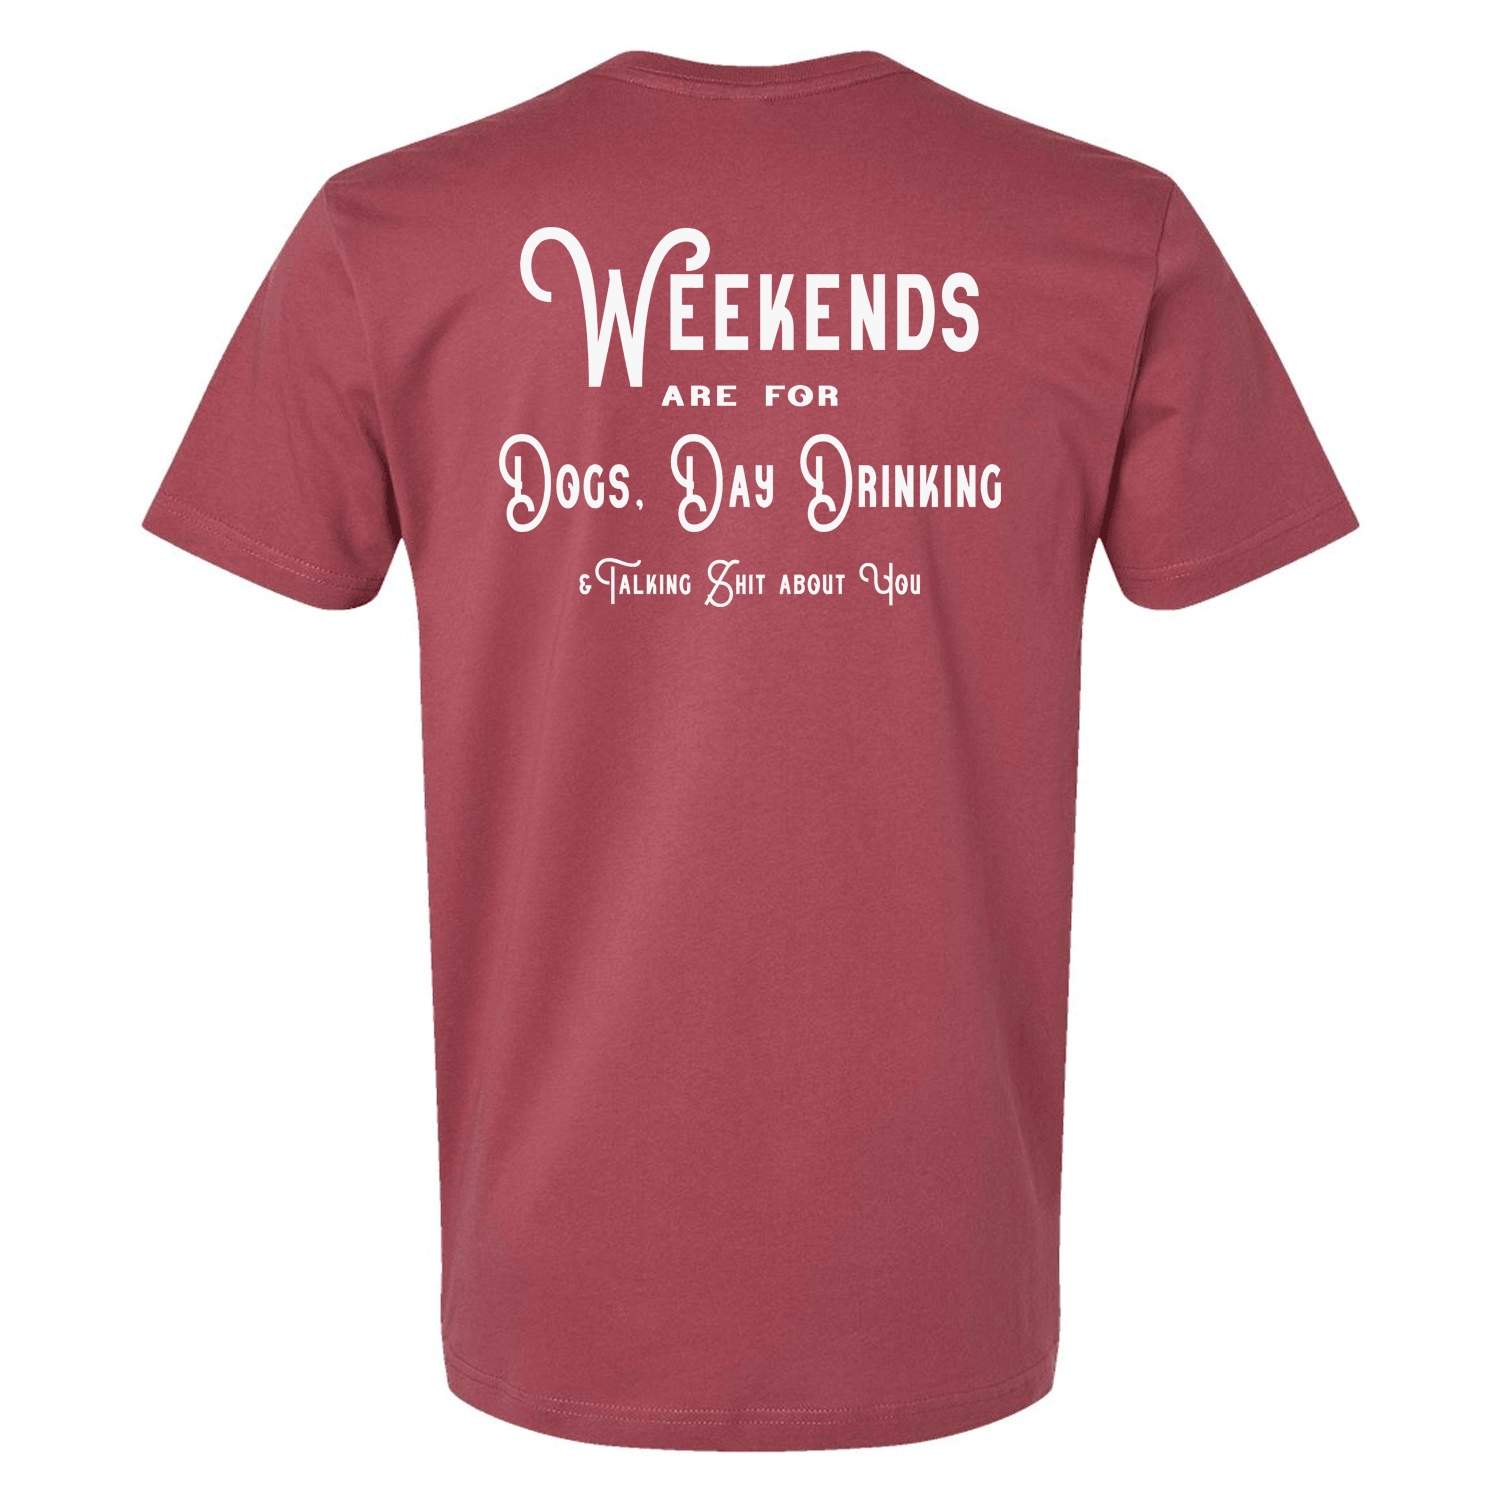 Weekends are for Dogs,Day Drinking...T-Shirt - Ales to Trails